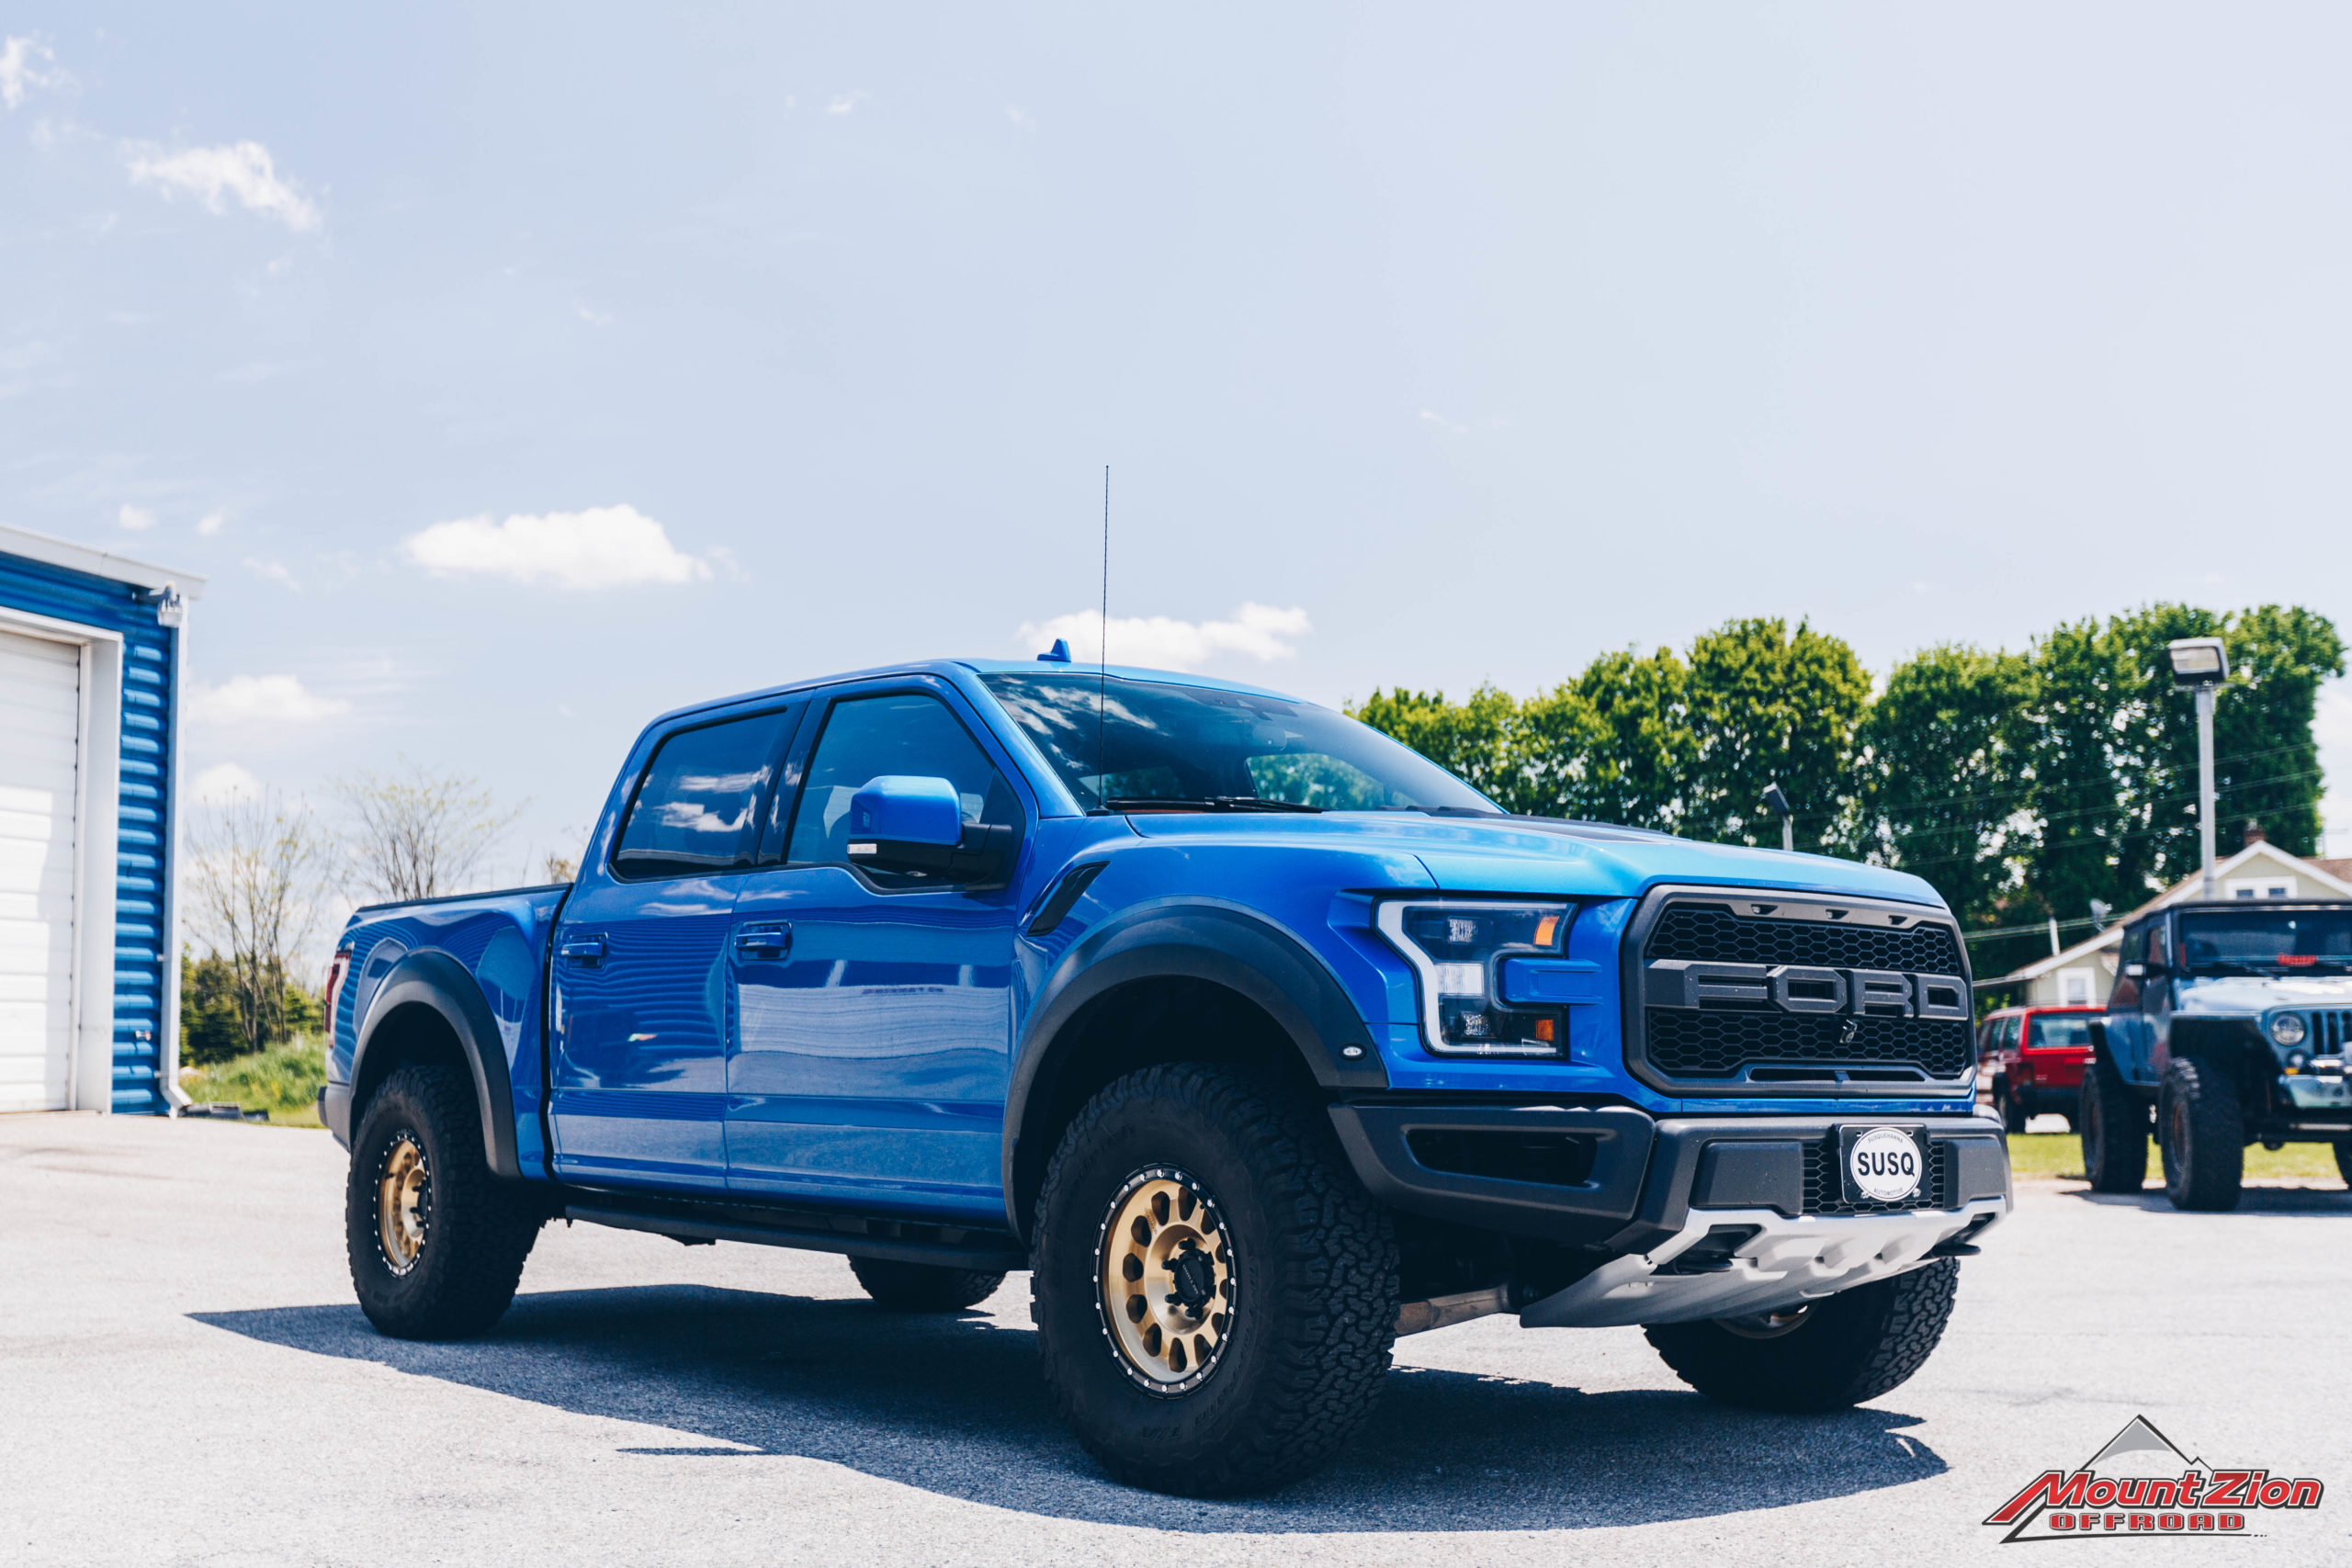 2020 Ford F-150 Raptor - Mount Zion Offroad